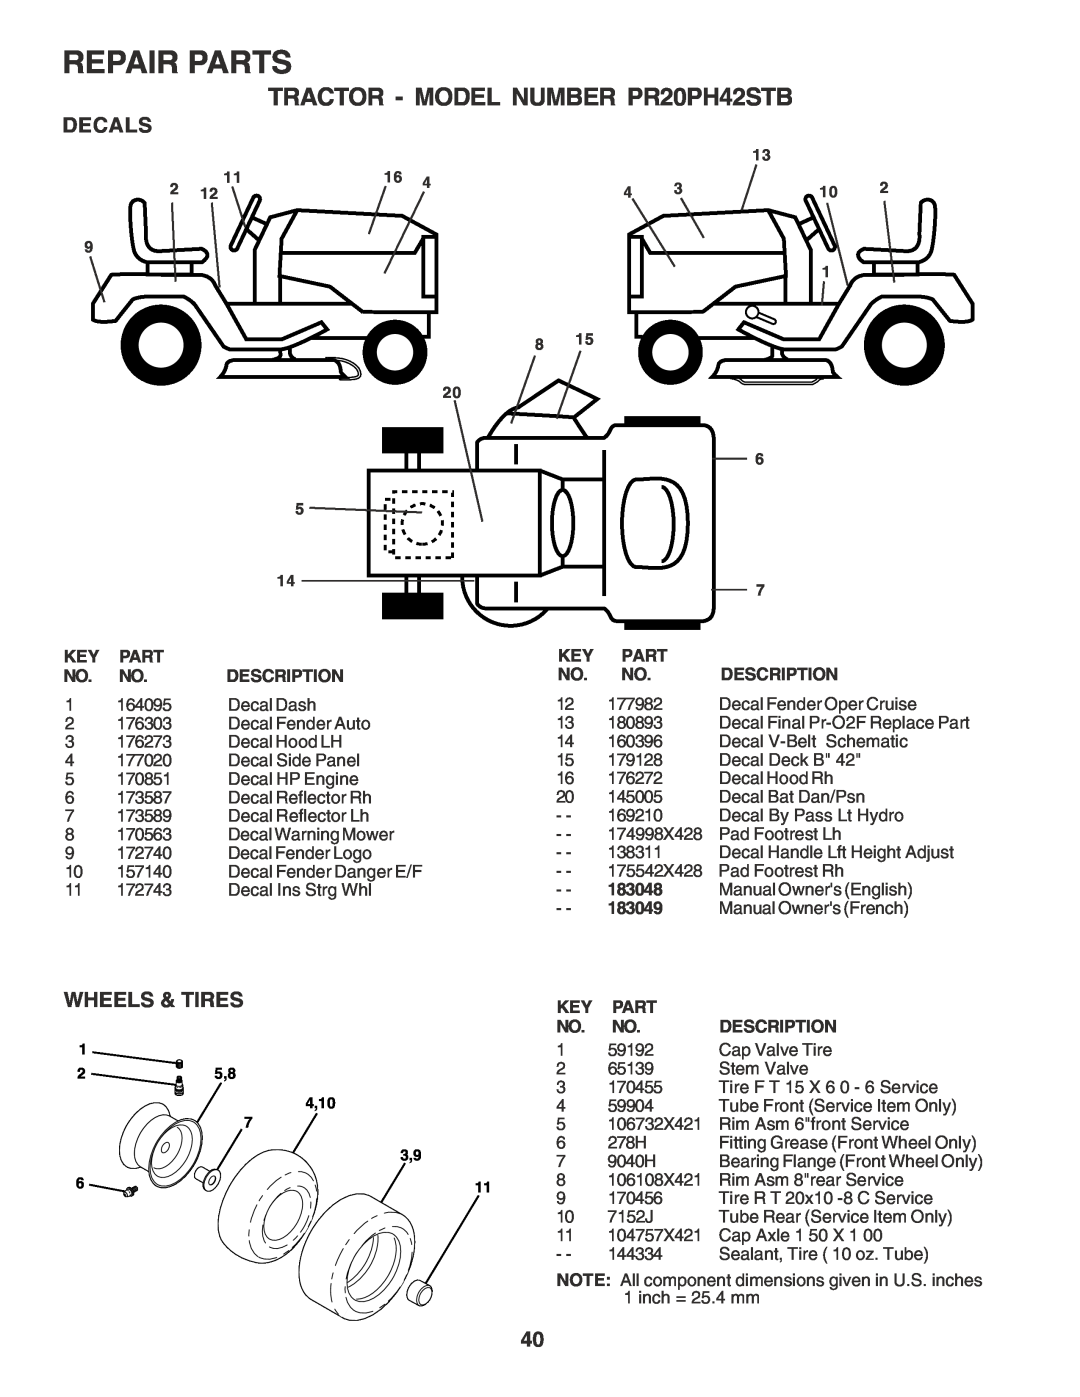 Poulan owner manual Decals, Wheels & Tires, Repair Parts, TRACTOR - MODEL NUMBER PR20PH42STB, 4,10 